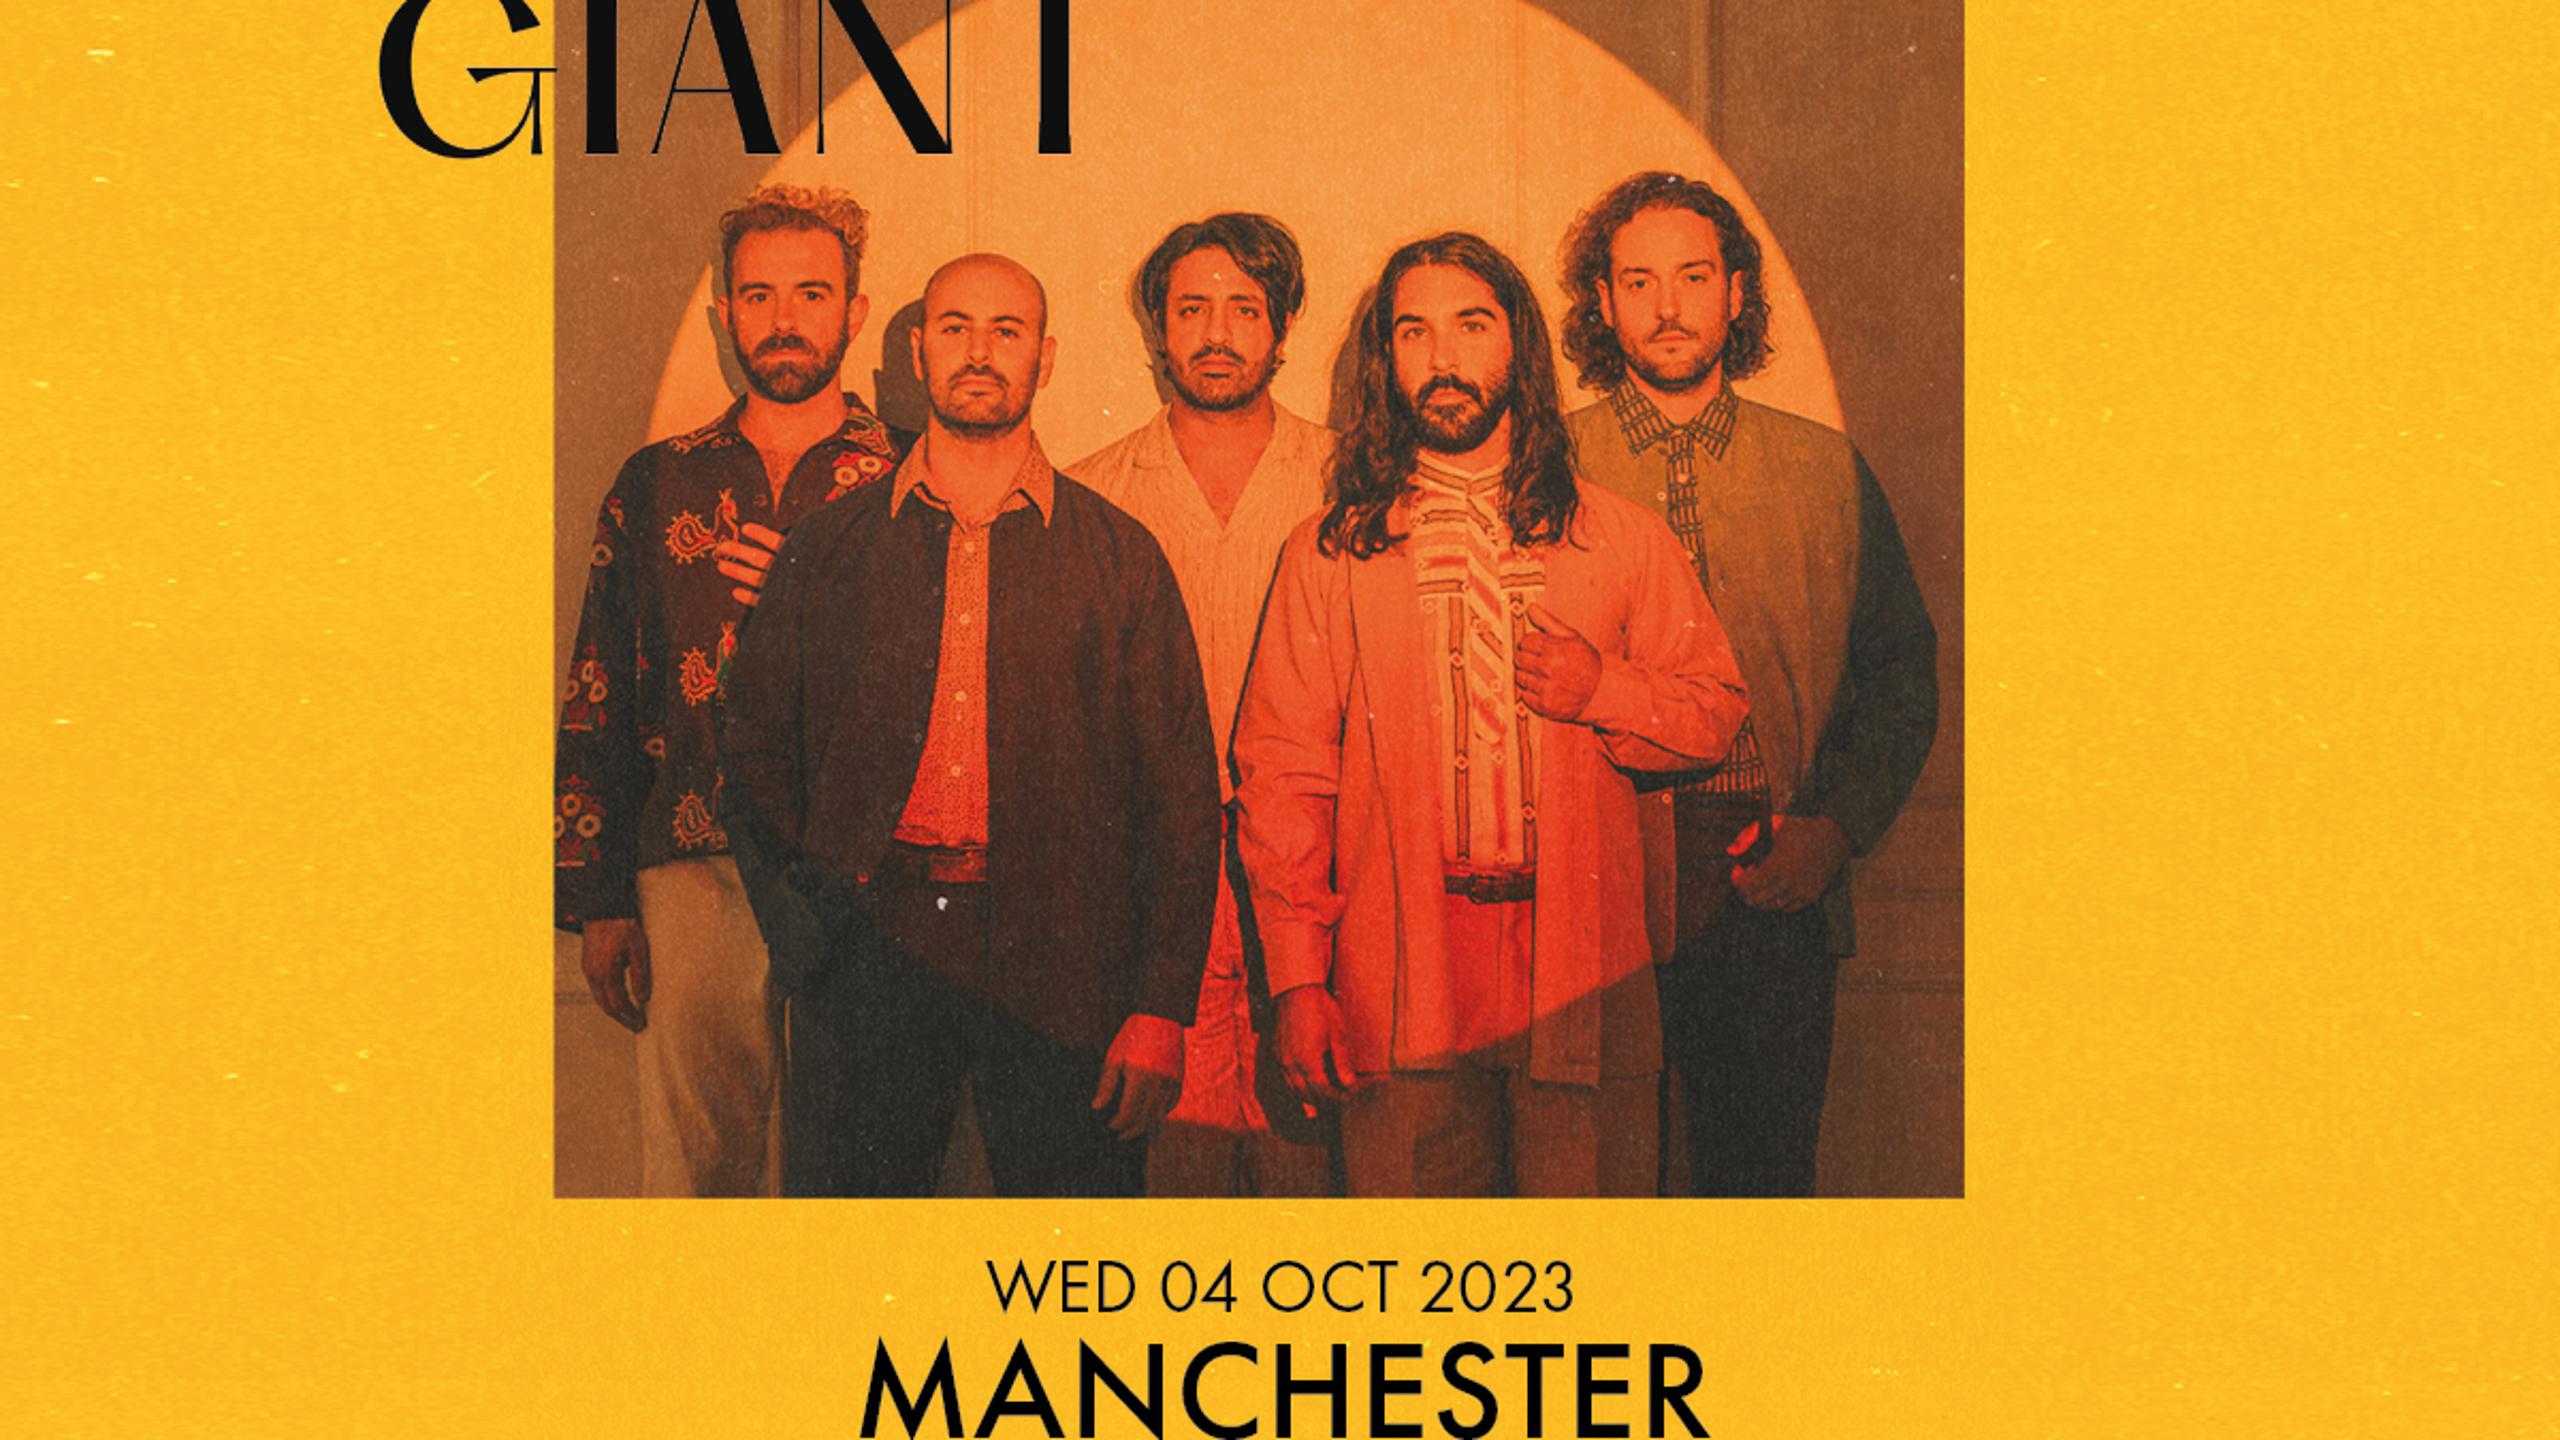 Young The Giant concert tickets for Gorilla, Manchester Wednesday, 4